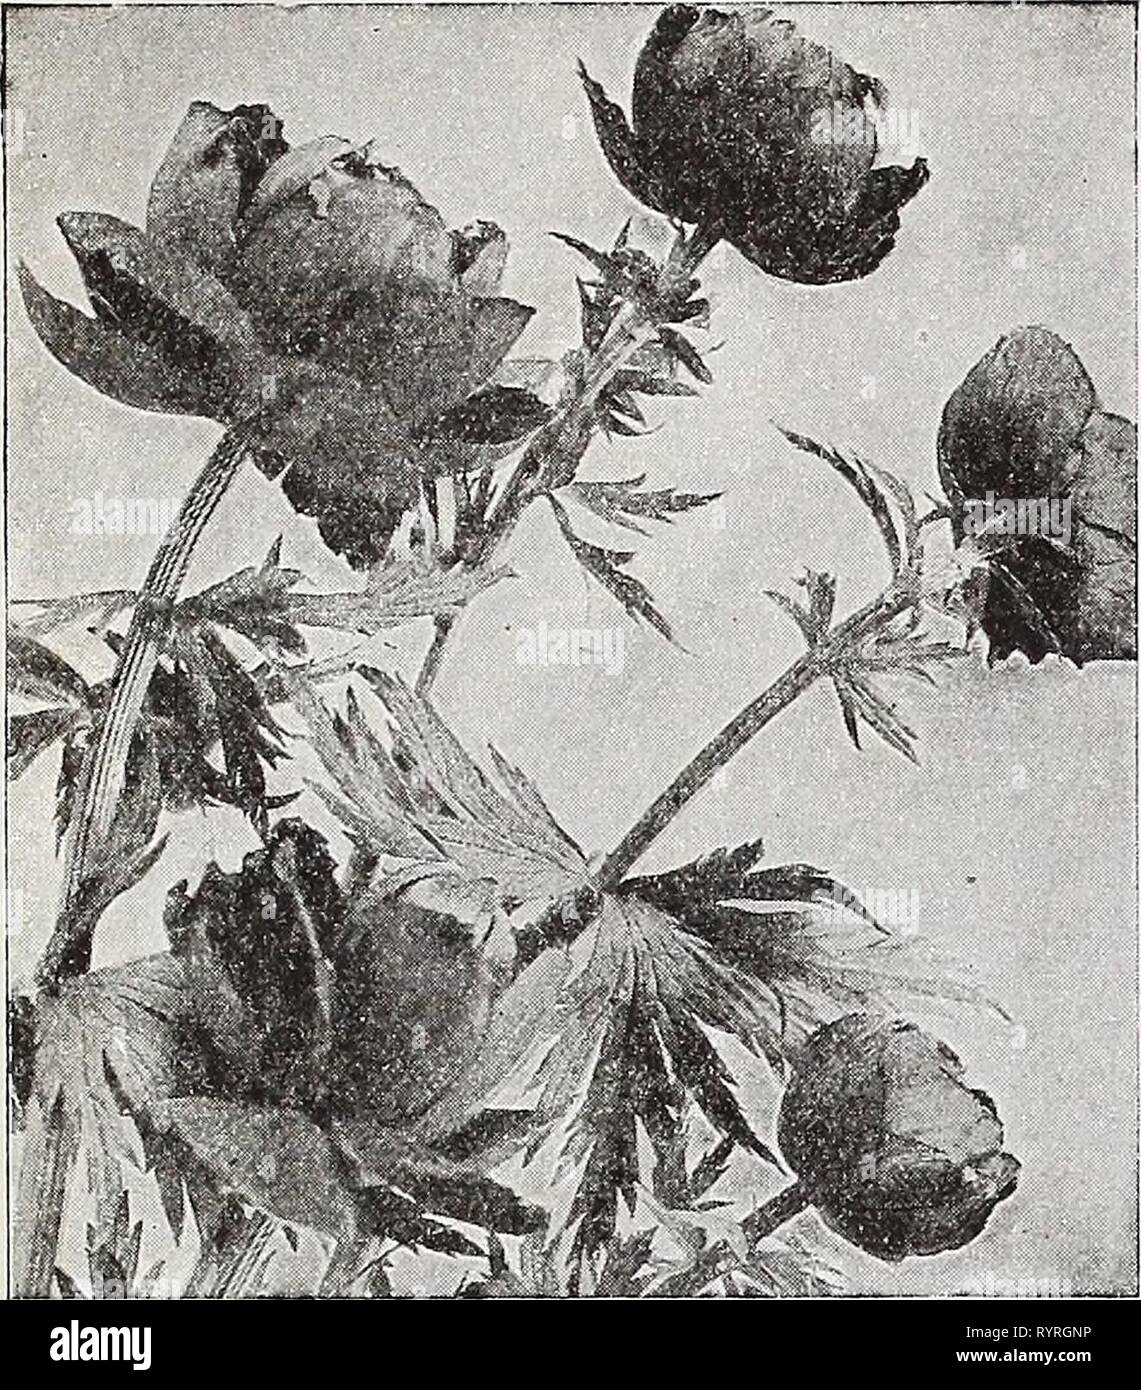 Dreer's novelties and specialties for Dreer's novelties and specialties for 1937 . dreersnoveltiess1937henr Year: 1937  HENRY A. DREER, Philadelphia, Pa.    Trollius—Globeflower ® Desirable free-flowering plants with large, strong-stemmed Buttercup-like blossoms ranging from pale yellow to deep orange. May and June. Europaeus superbus. 2 ft. Glorified globe-shaped Buttercups. Waxy lemon yellow. Ledebouri, Golden Queen. 2 ft. A magnificent variety with beautiful rich golden yellow blooms during July and August. Each 50c; 3 for $1.40; 12 for $5.50. Meteor. 3 ft. Very large, deep rich orange. Ora Stock Photo